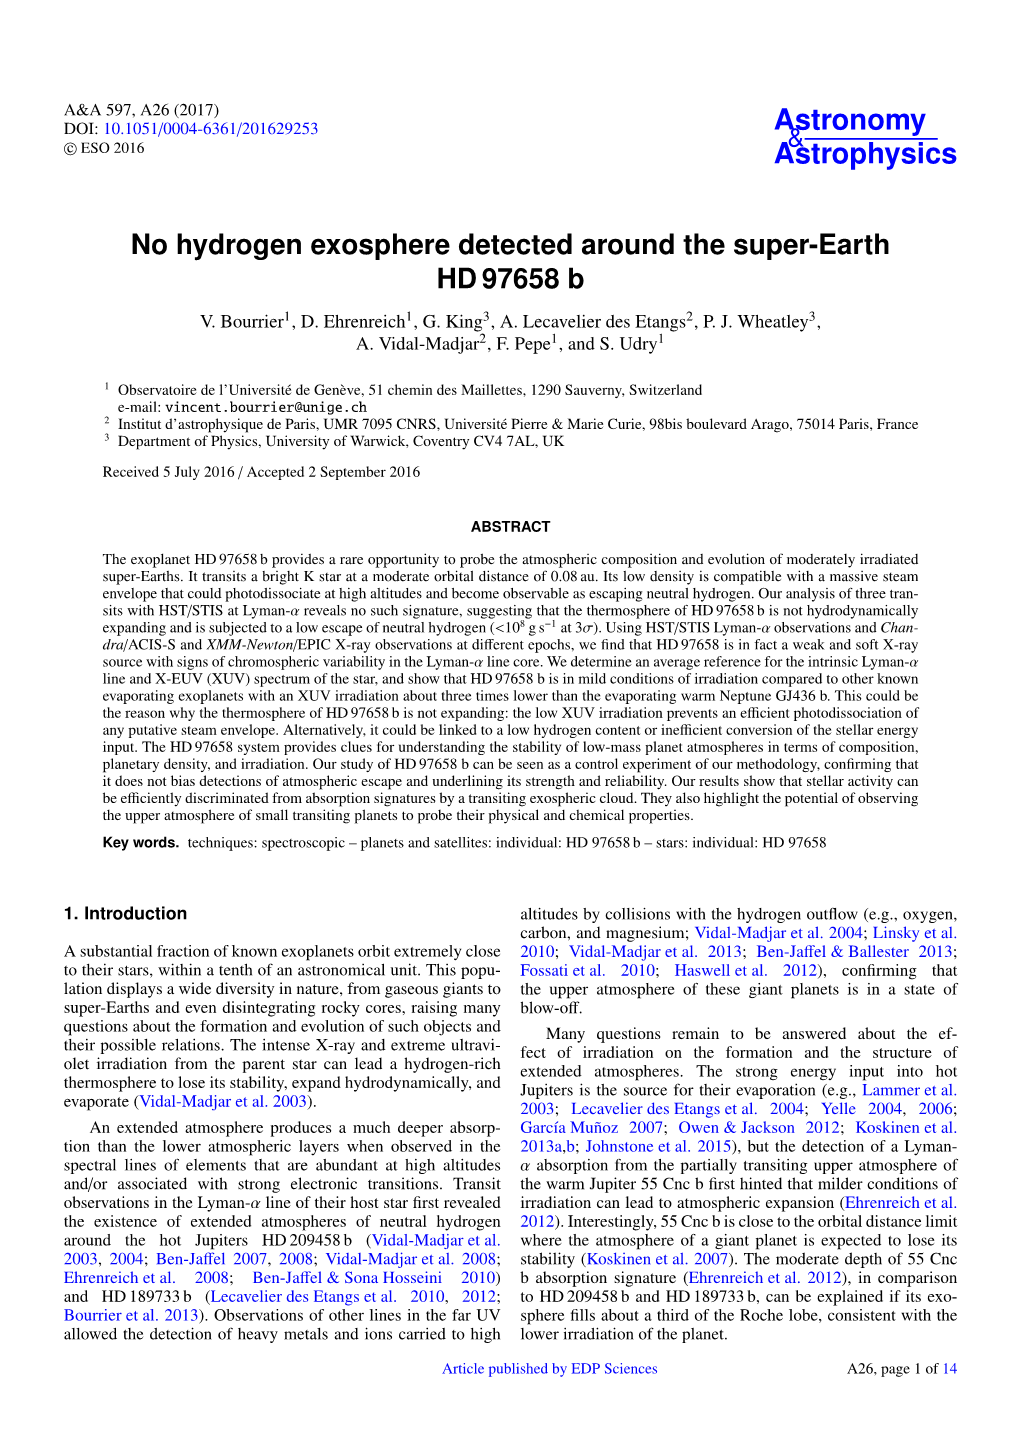 No Hydrogen Exosphere Detected Around the Super-Earth HD 97658 B V